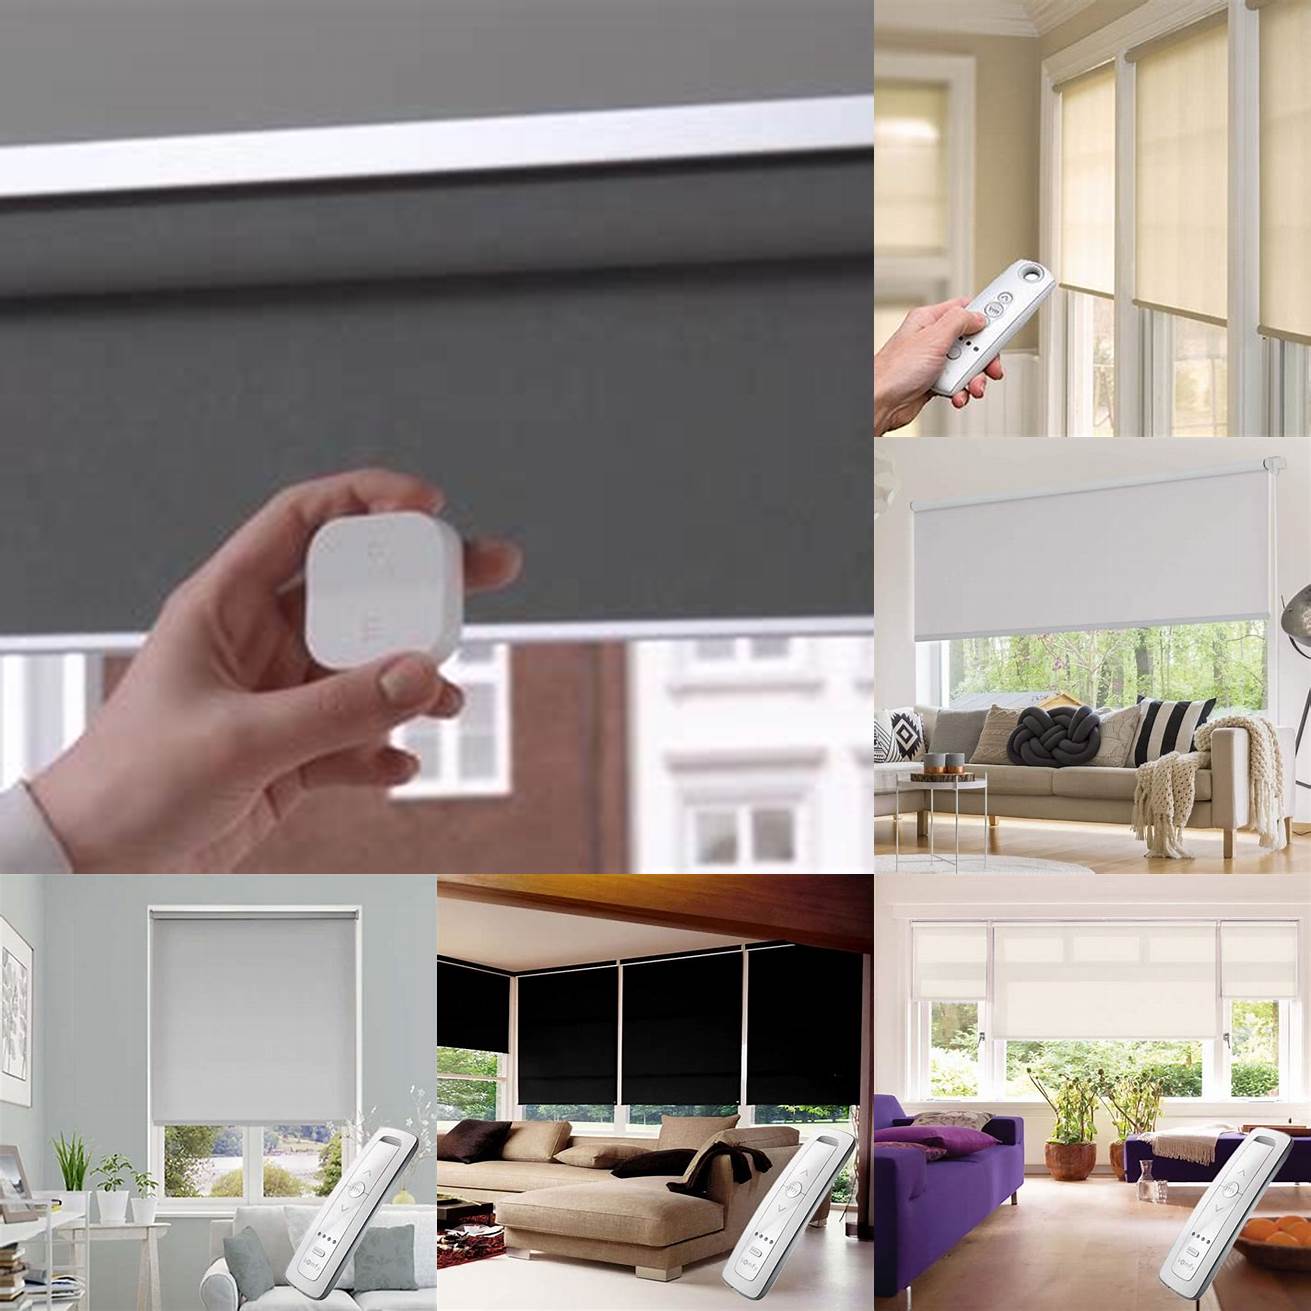 Motorized Roller Blinds These can be controlled with a remote or a smartphone app and can be programmed to open and close at specific times